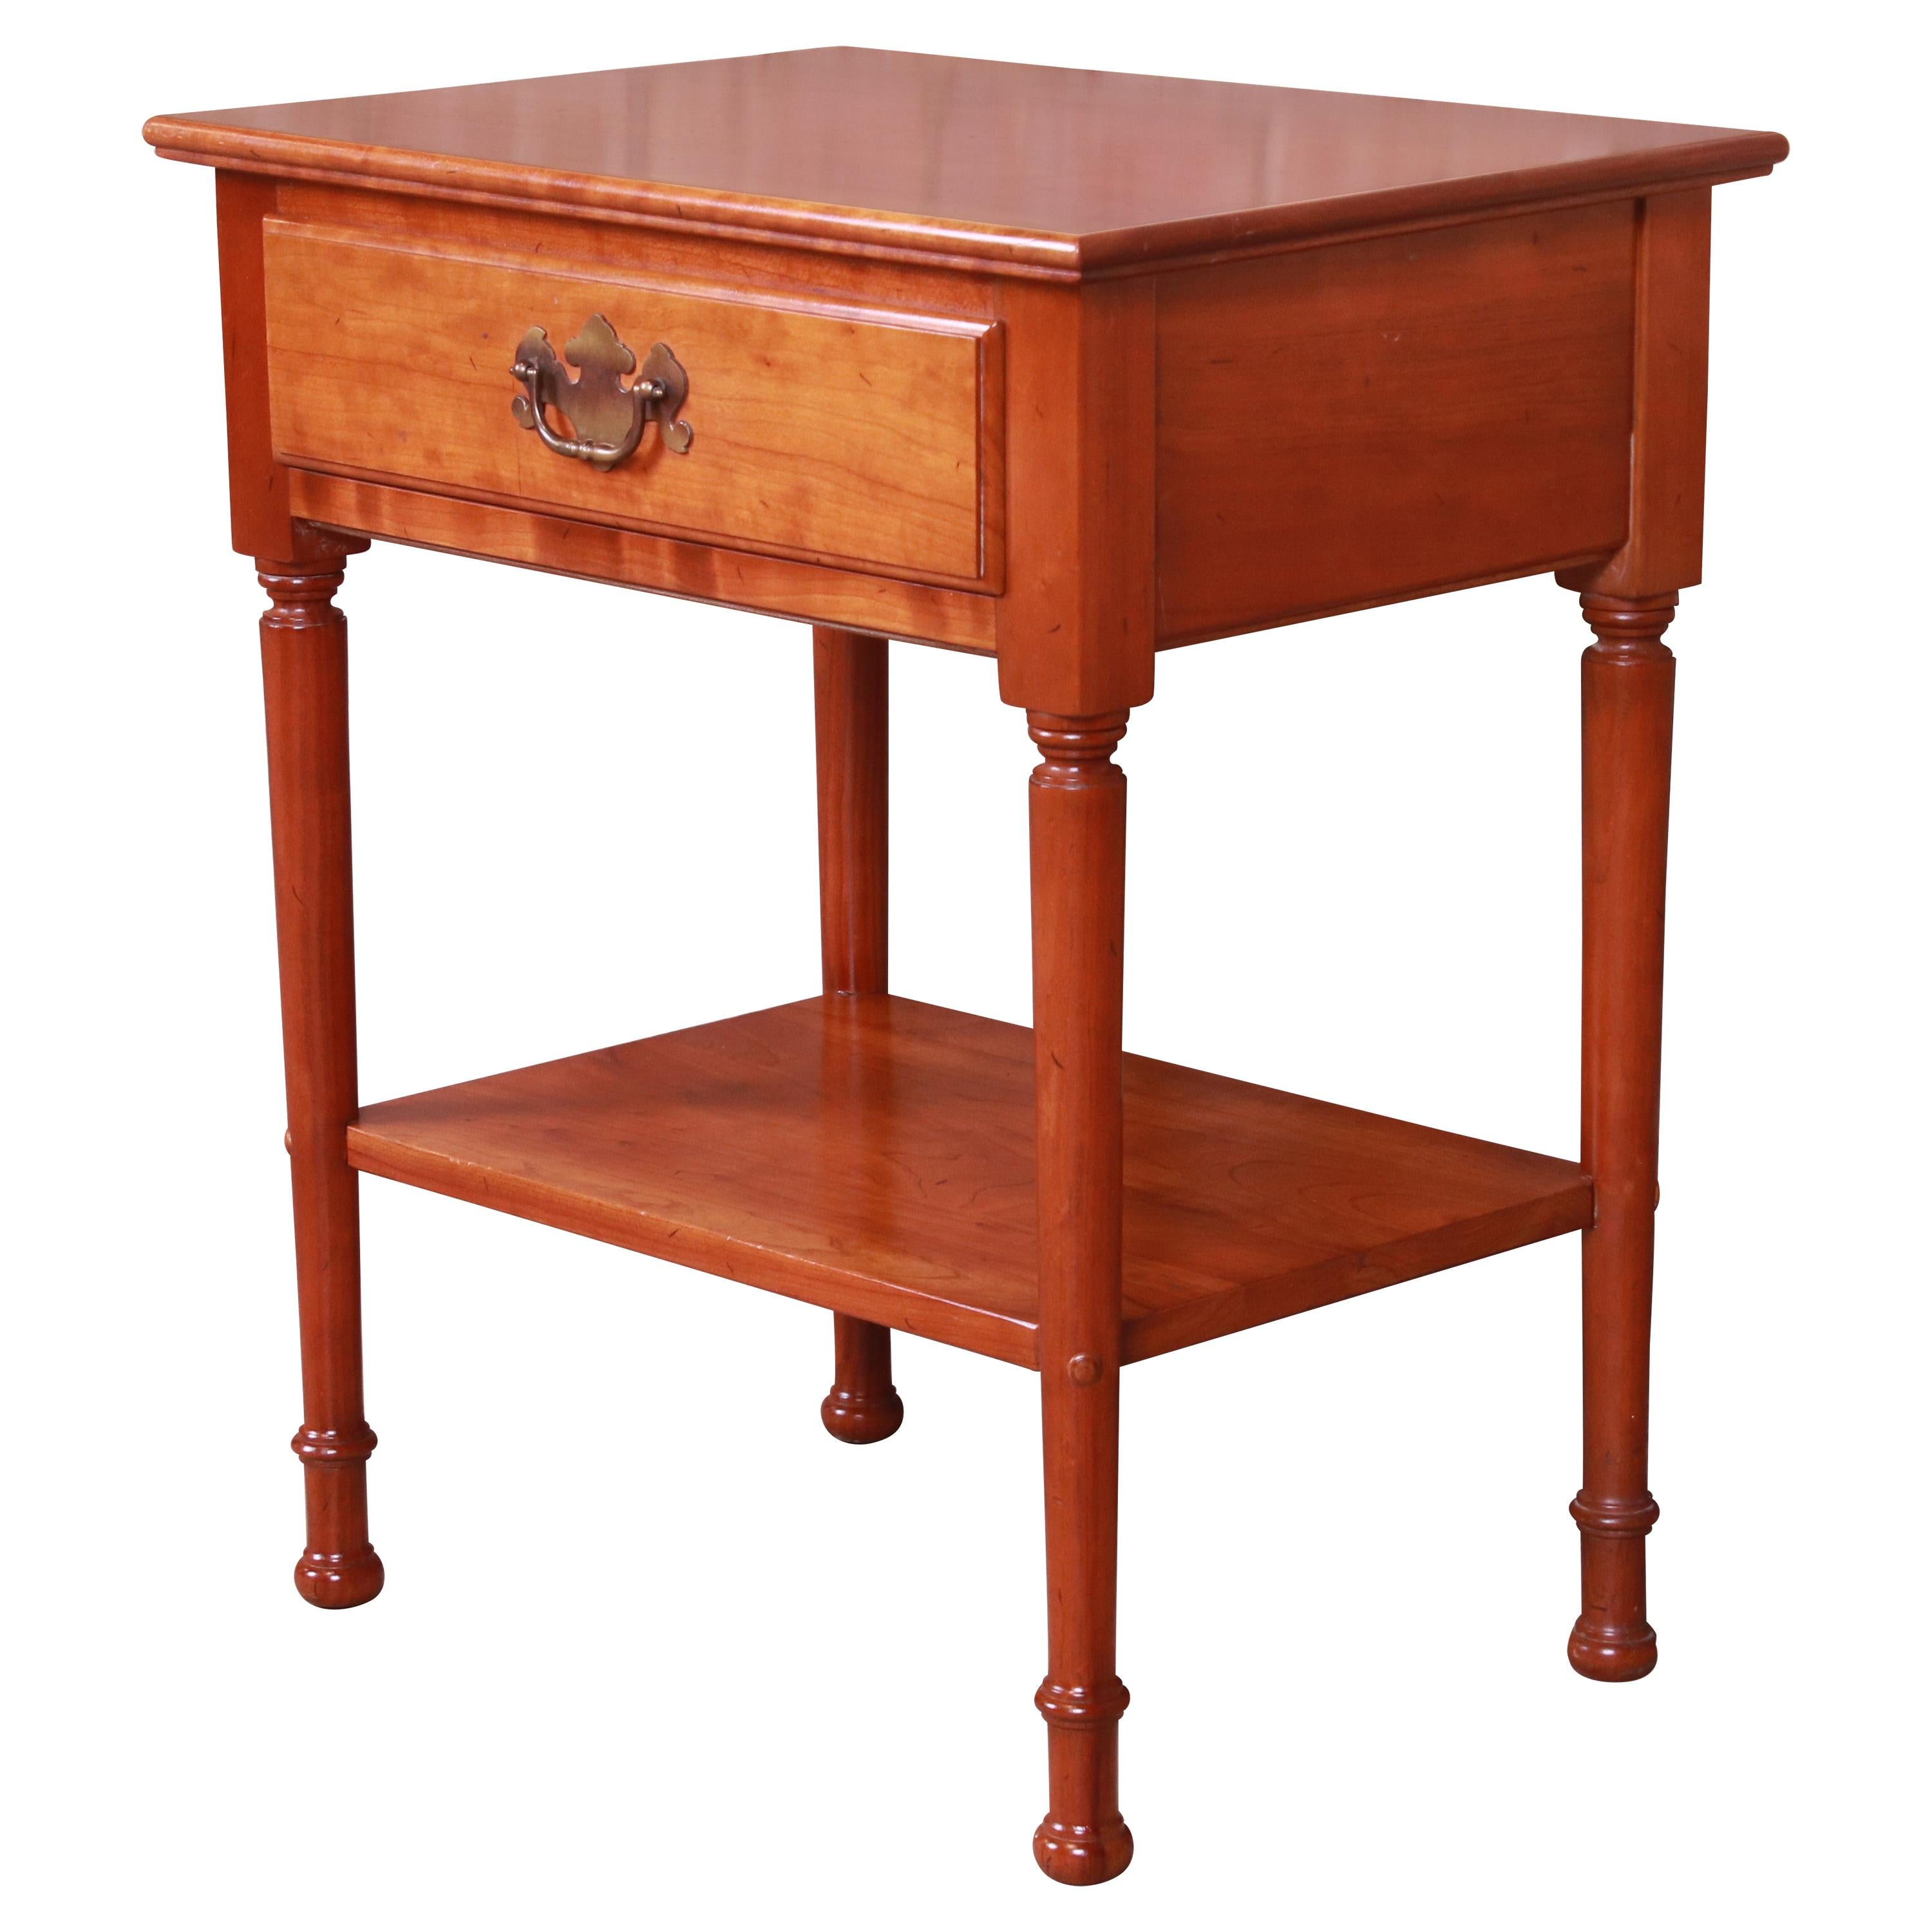 Stickley American Colonial Solid Cherry Wood Nightstand or Occasional Side Table